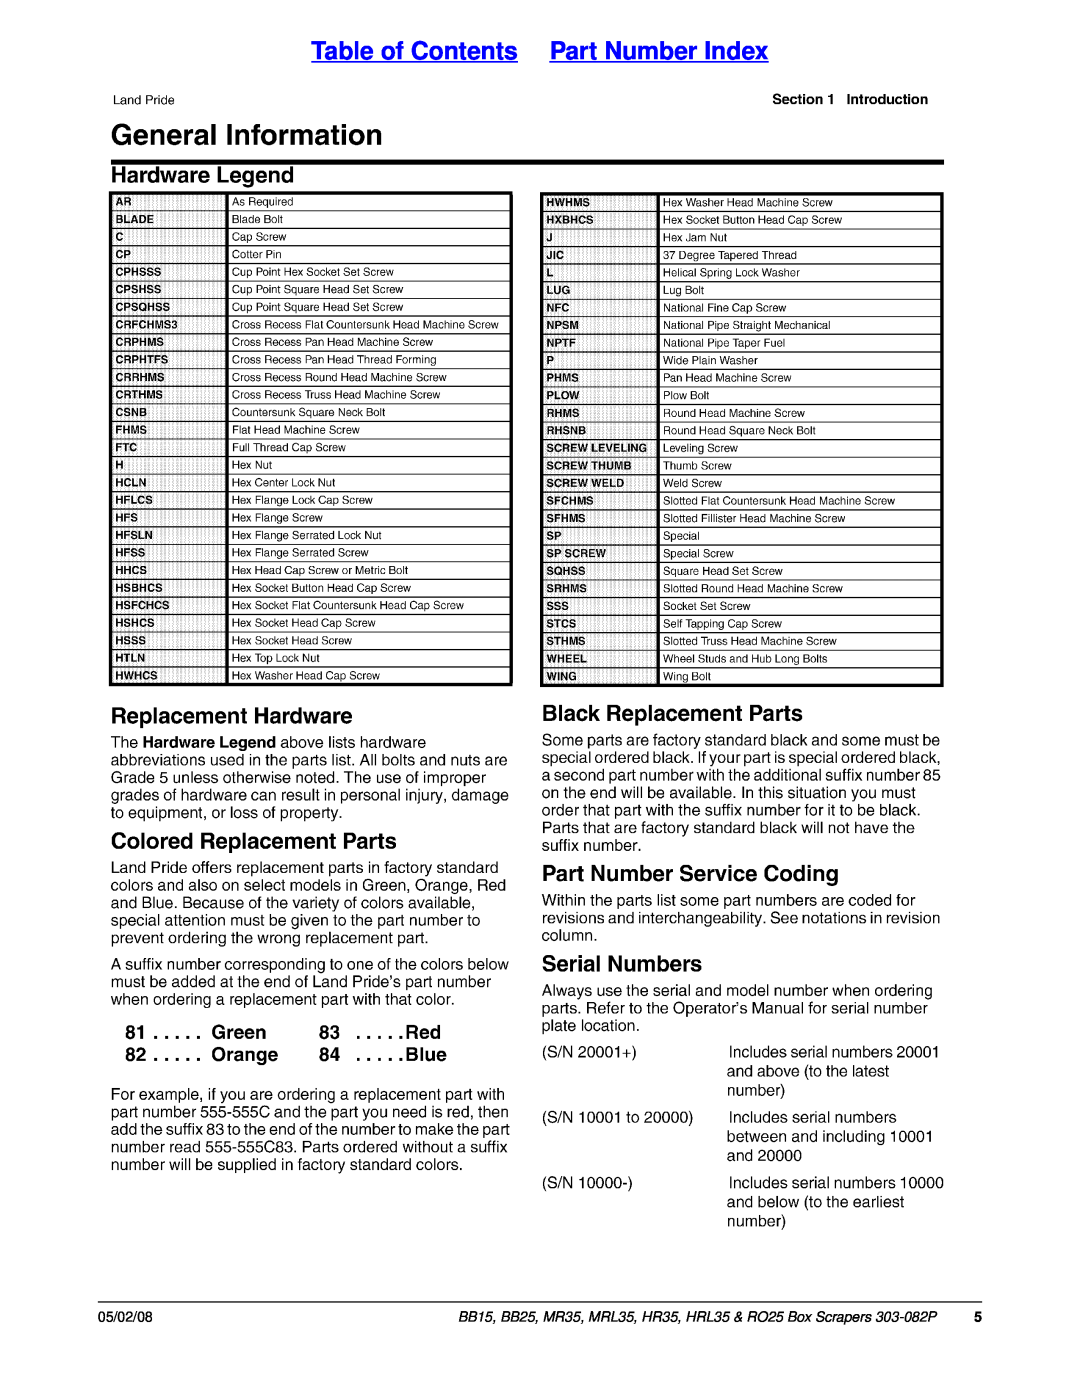 Land Pride MR35, MRL35, HRL35, HR35, RO25 manual Table of Contents Part Number Index, 05/02/08 